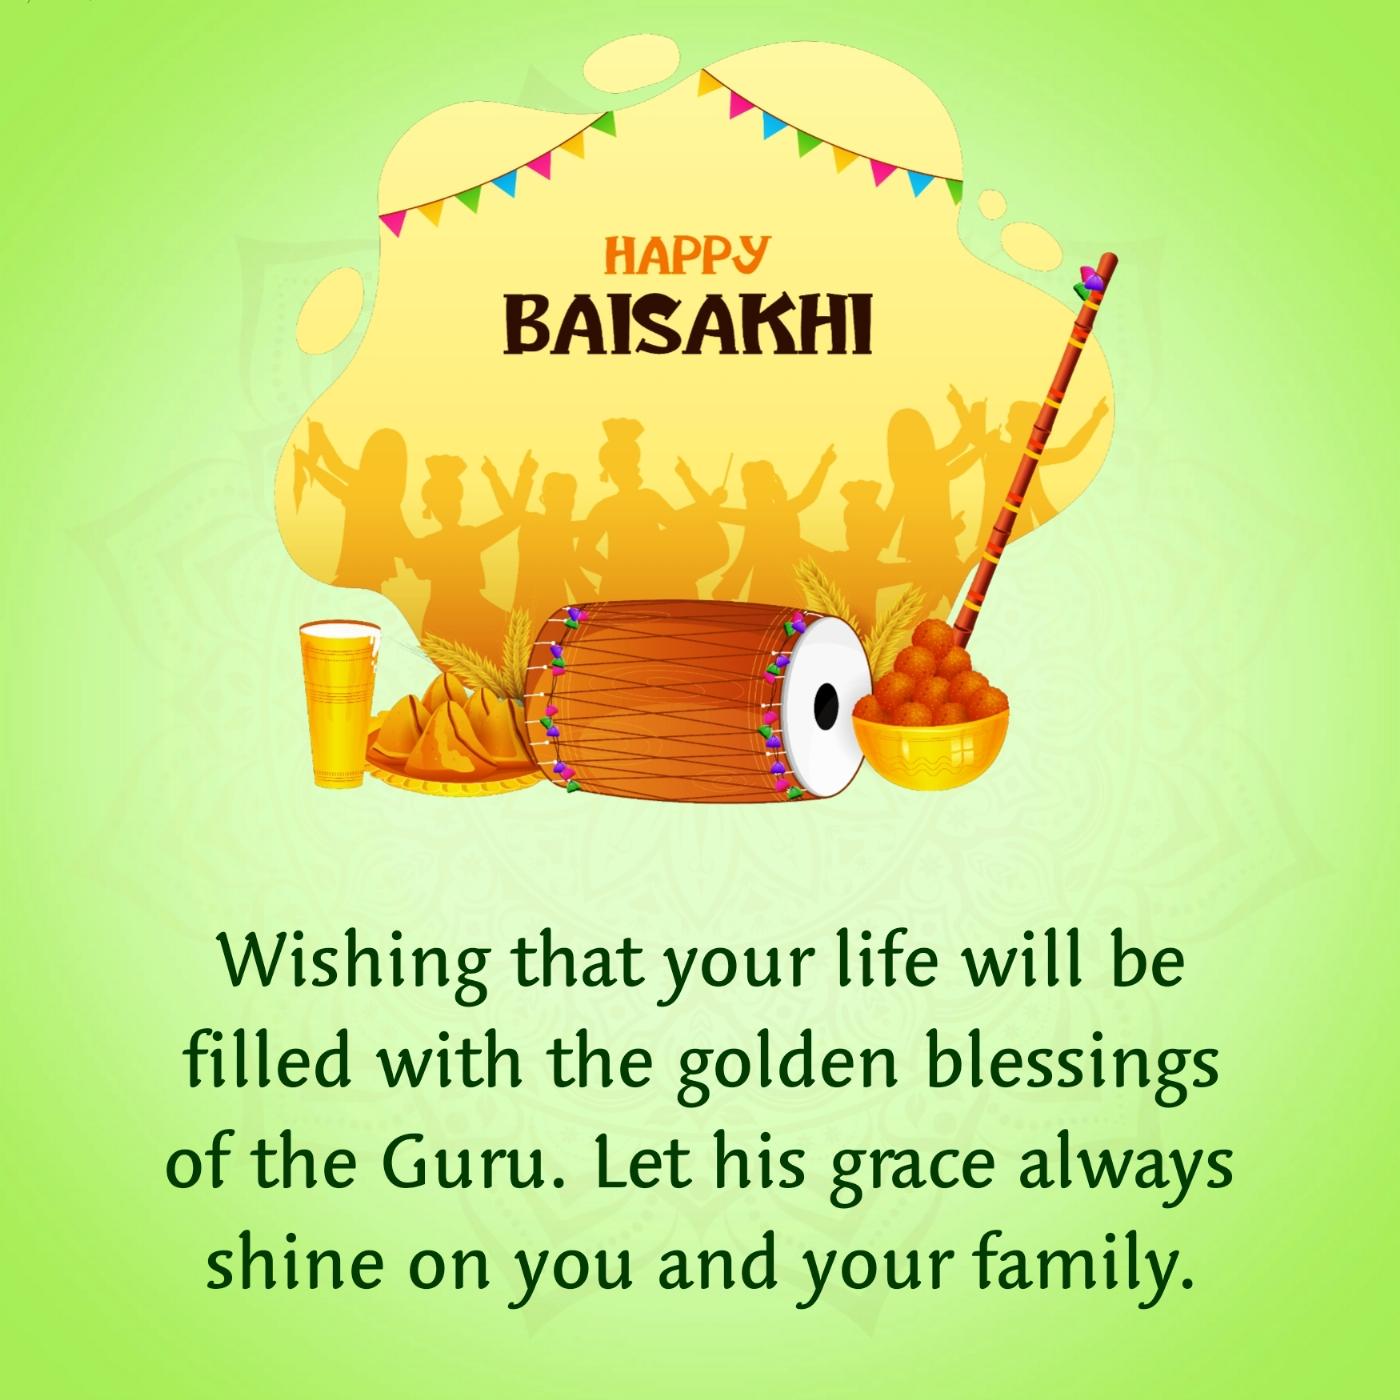 Wishing that your life will be filled with the golden blessings